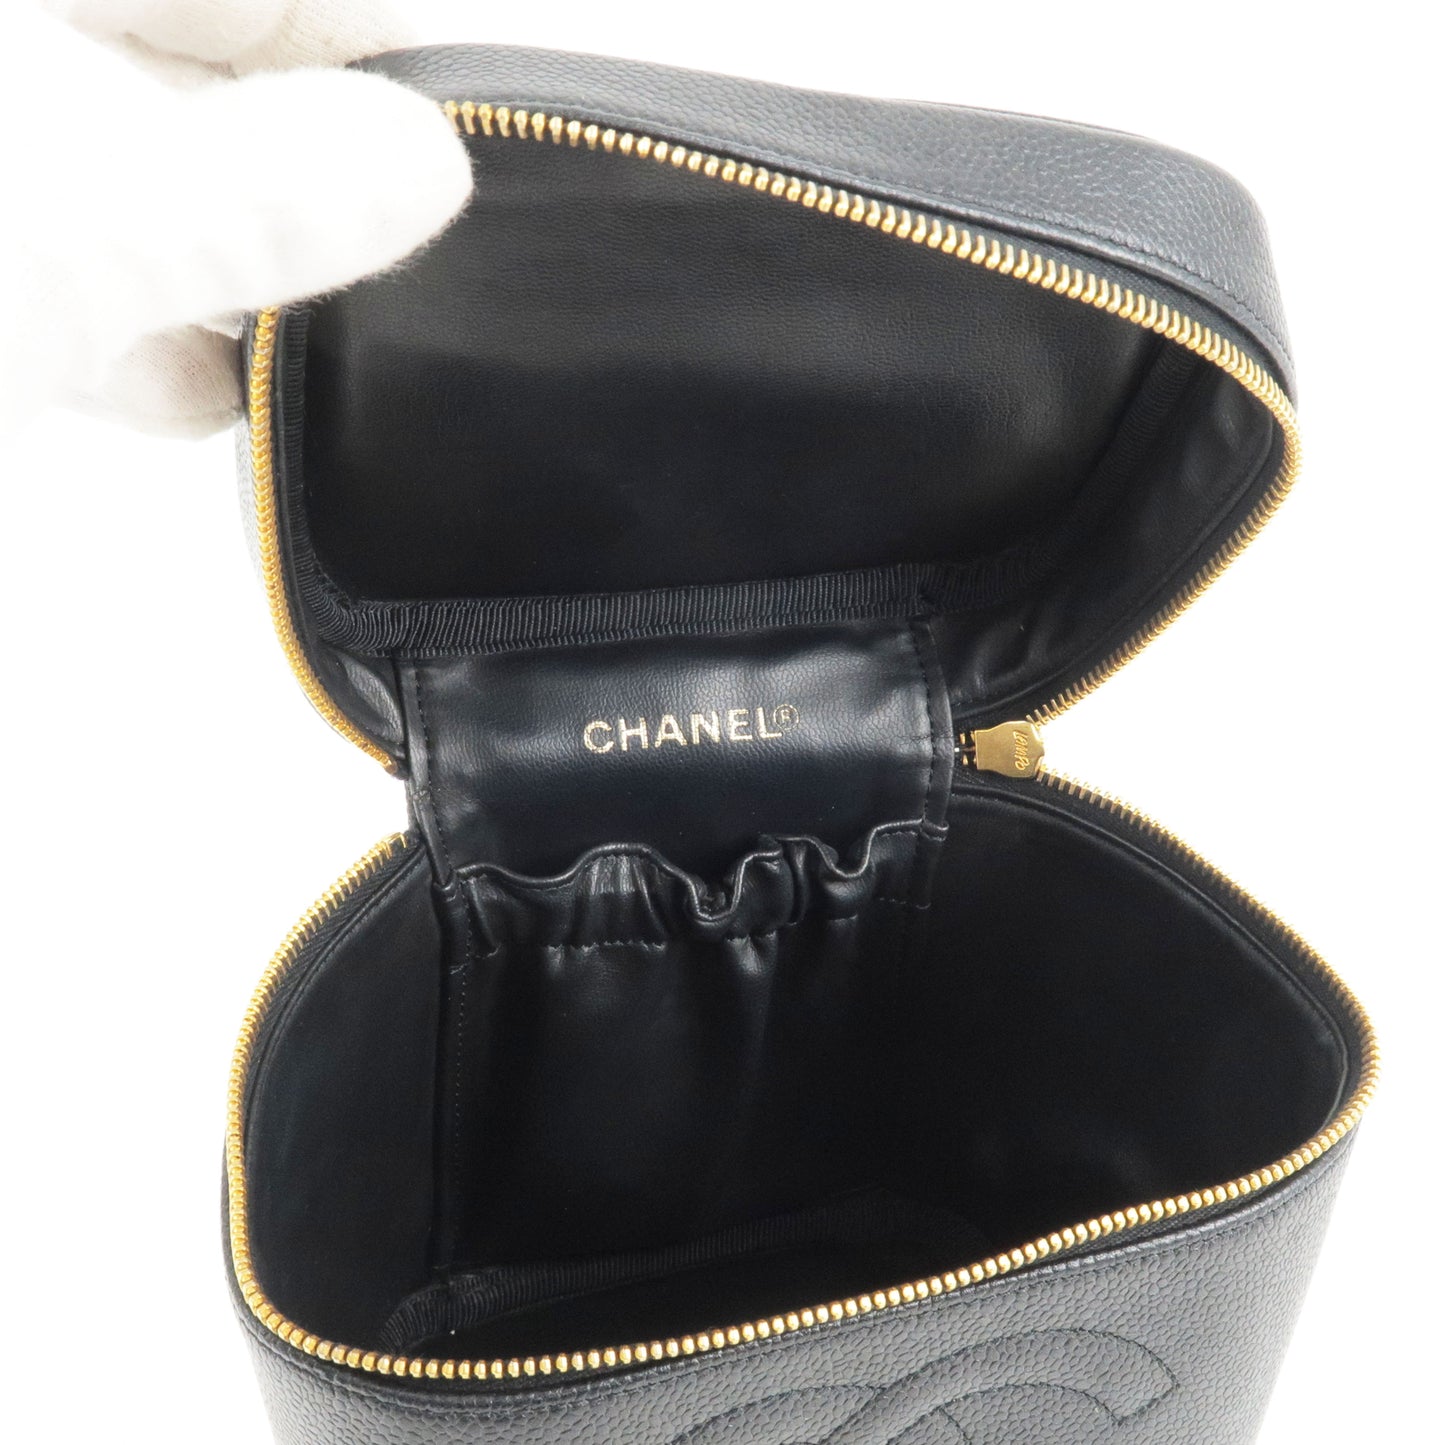 CHANEL Caviar Skin Vanity Bag Hand Bag Cosmetic Pouch Black A01998